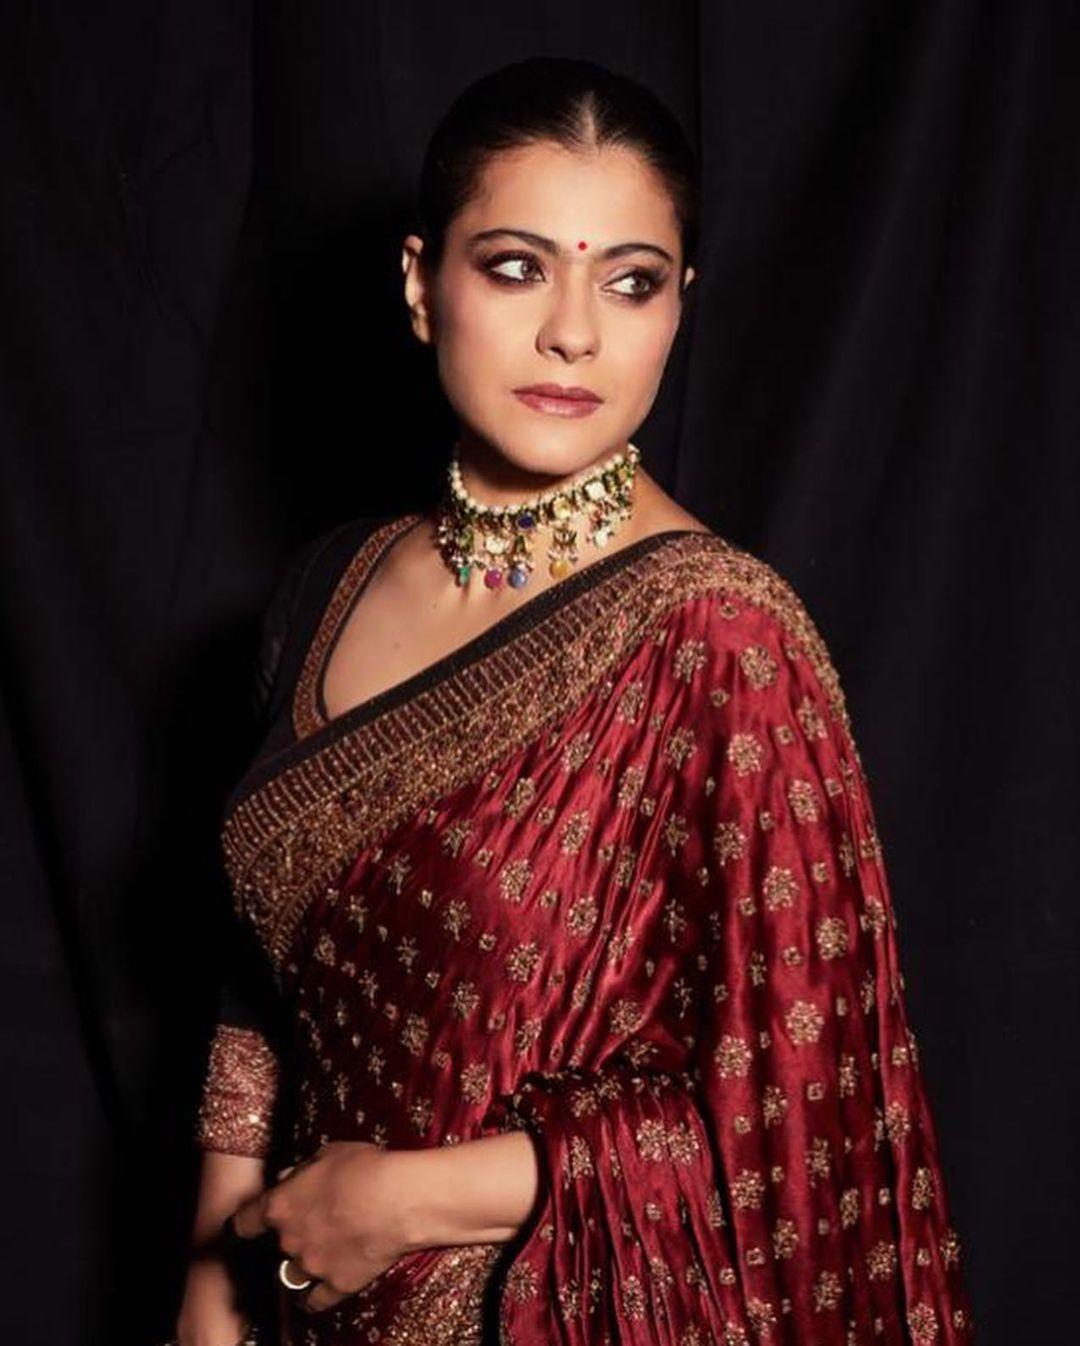 For Diwali, this look by Kajol is the one for you. She completely nailed the royal look with her outfit choice.